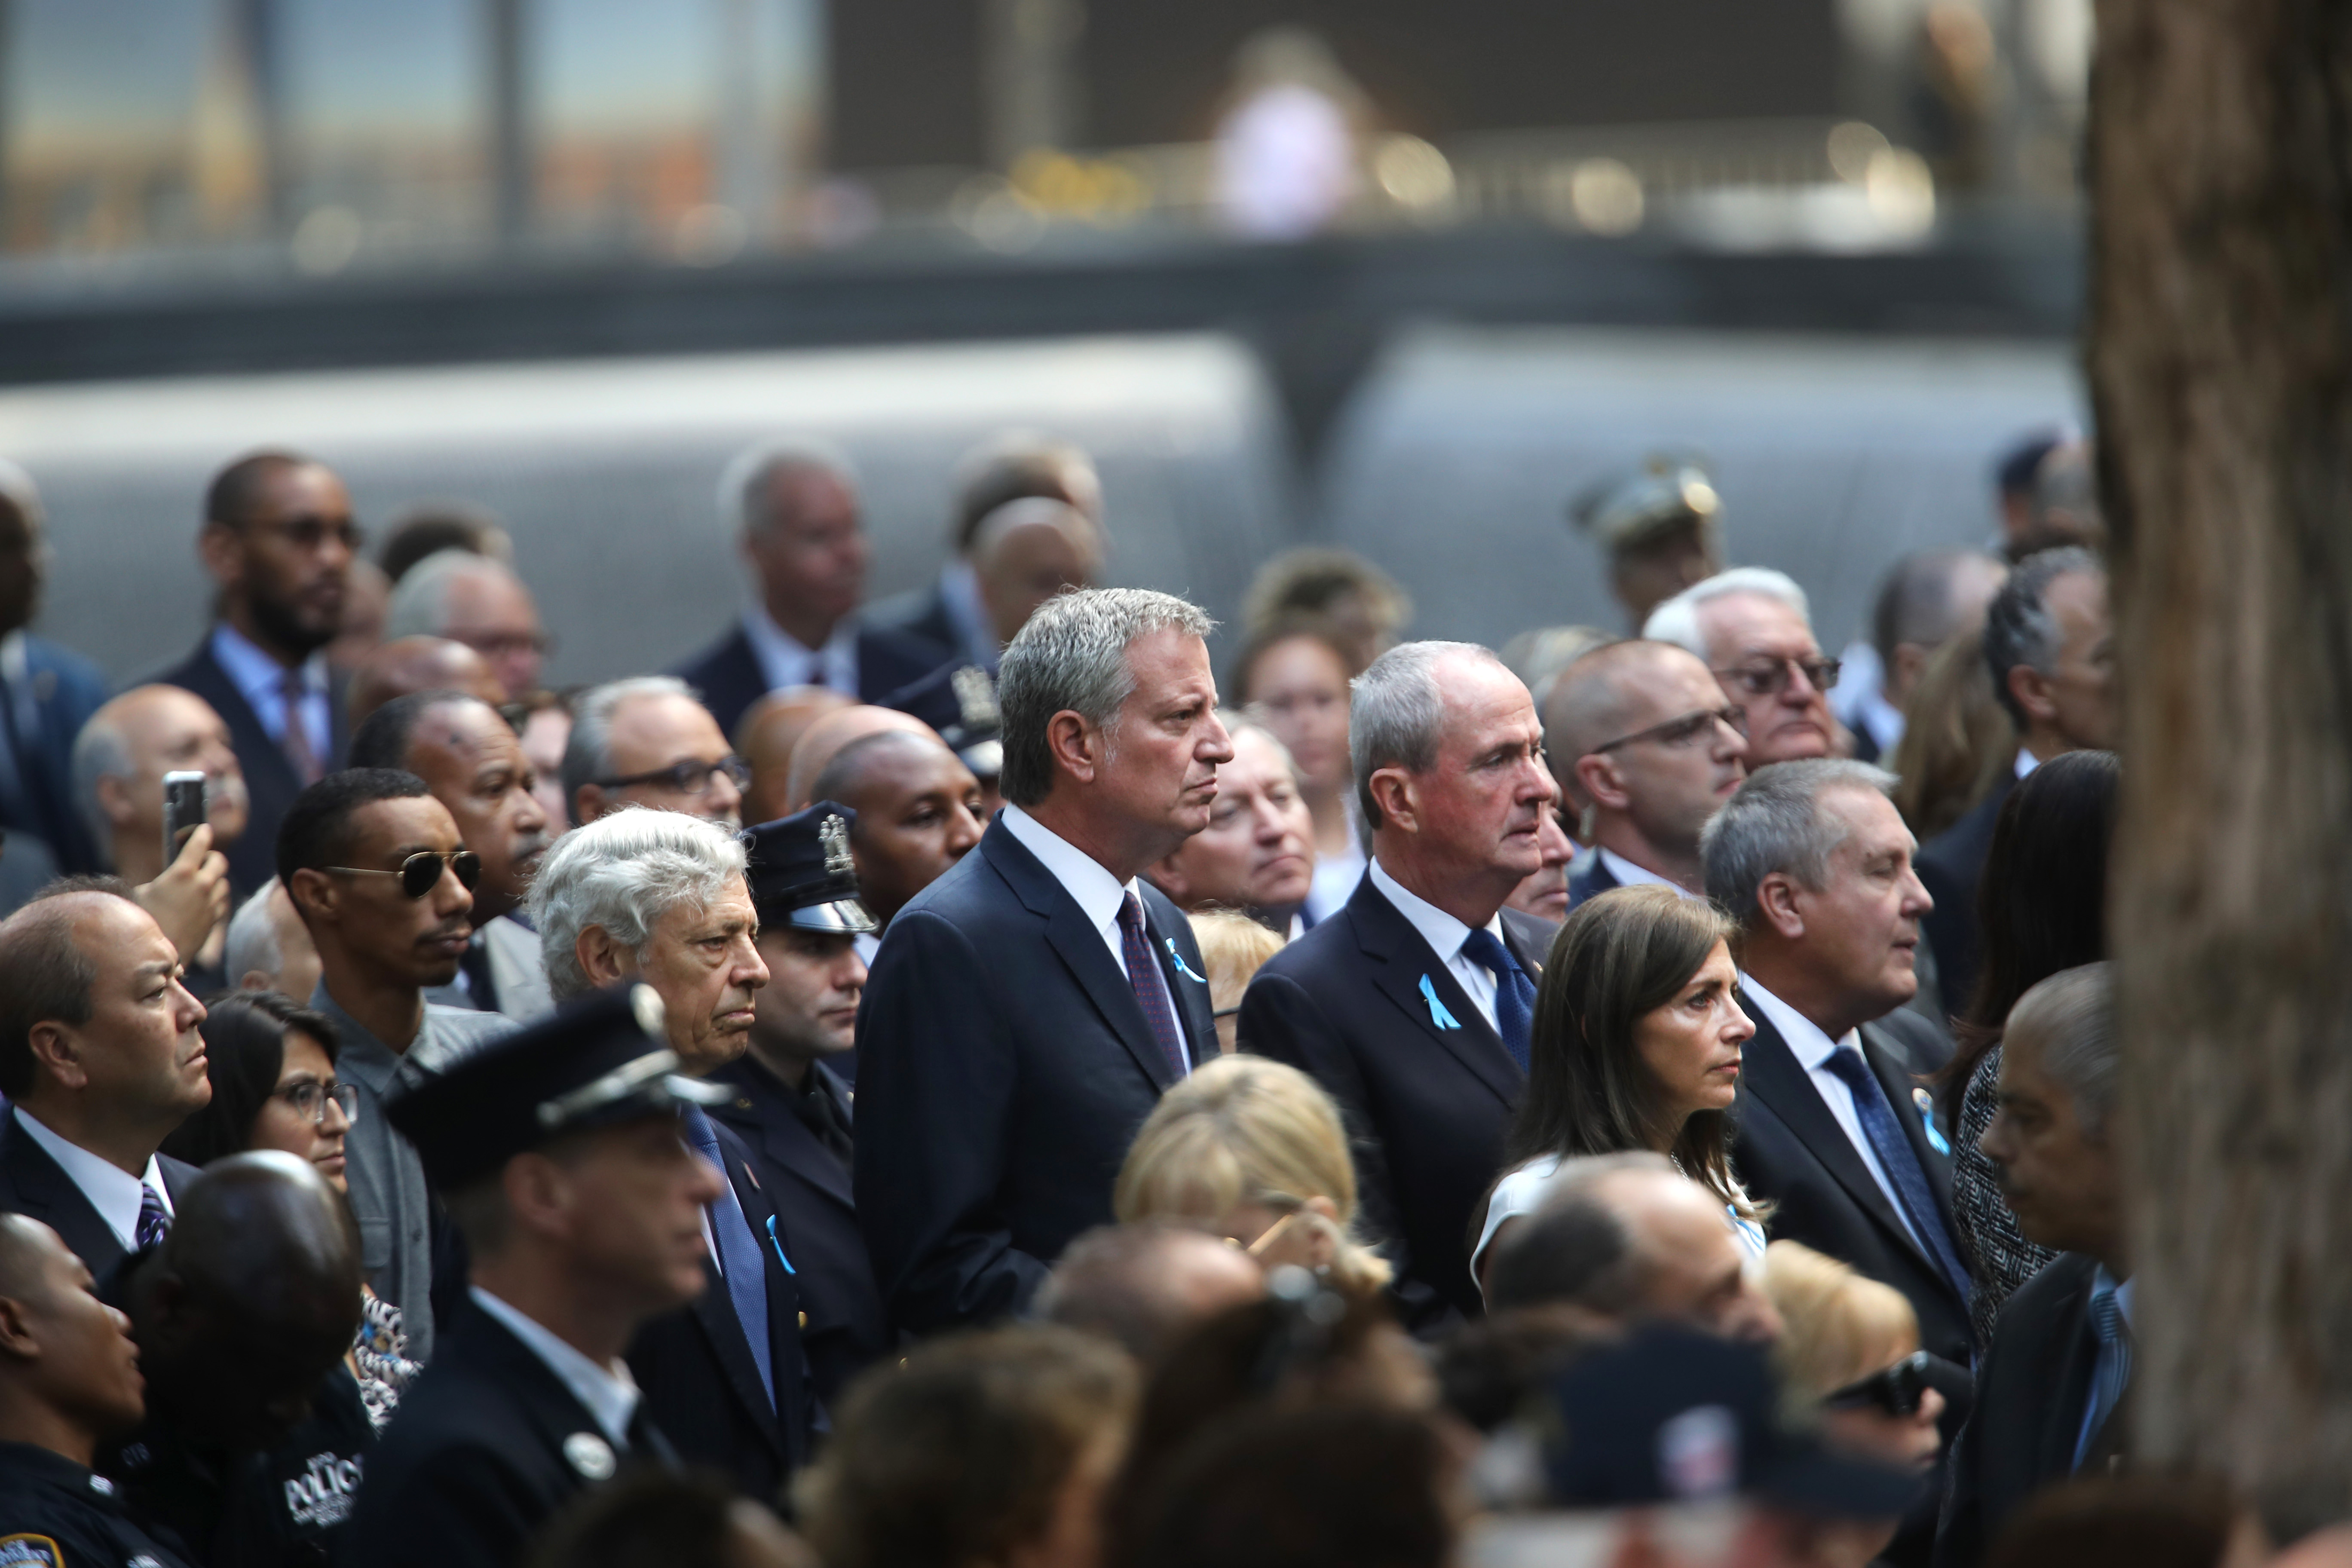 New York City Mayor and 2020 presidential candidate Bill de Blasio participates in ceremonies at the National September 11 Memorial.